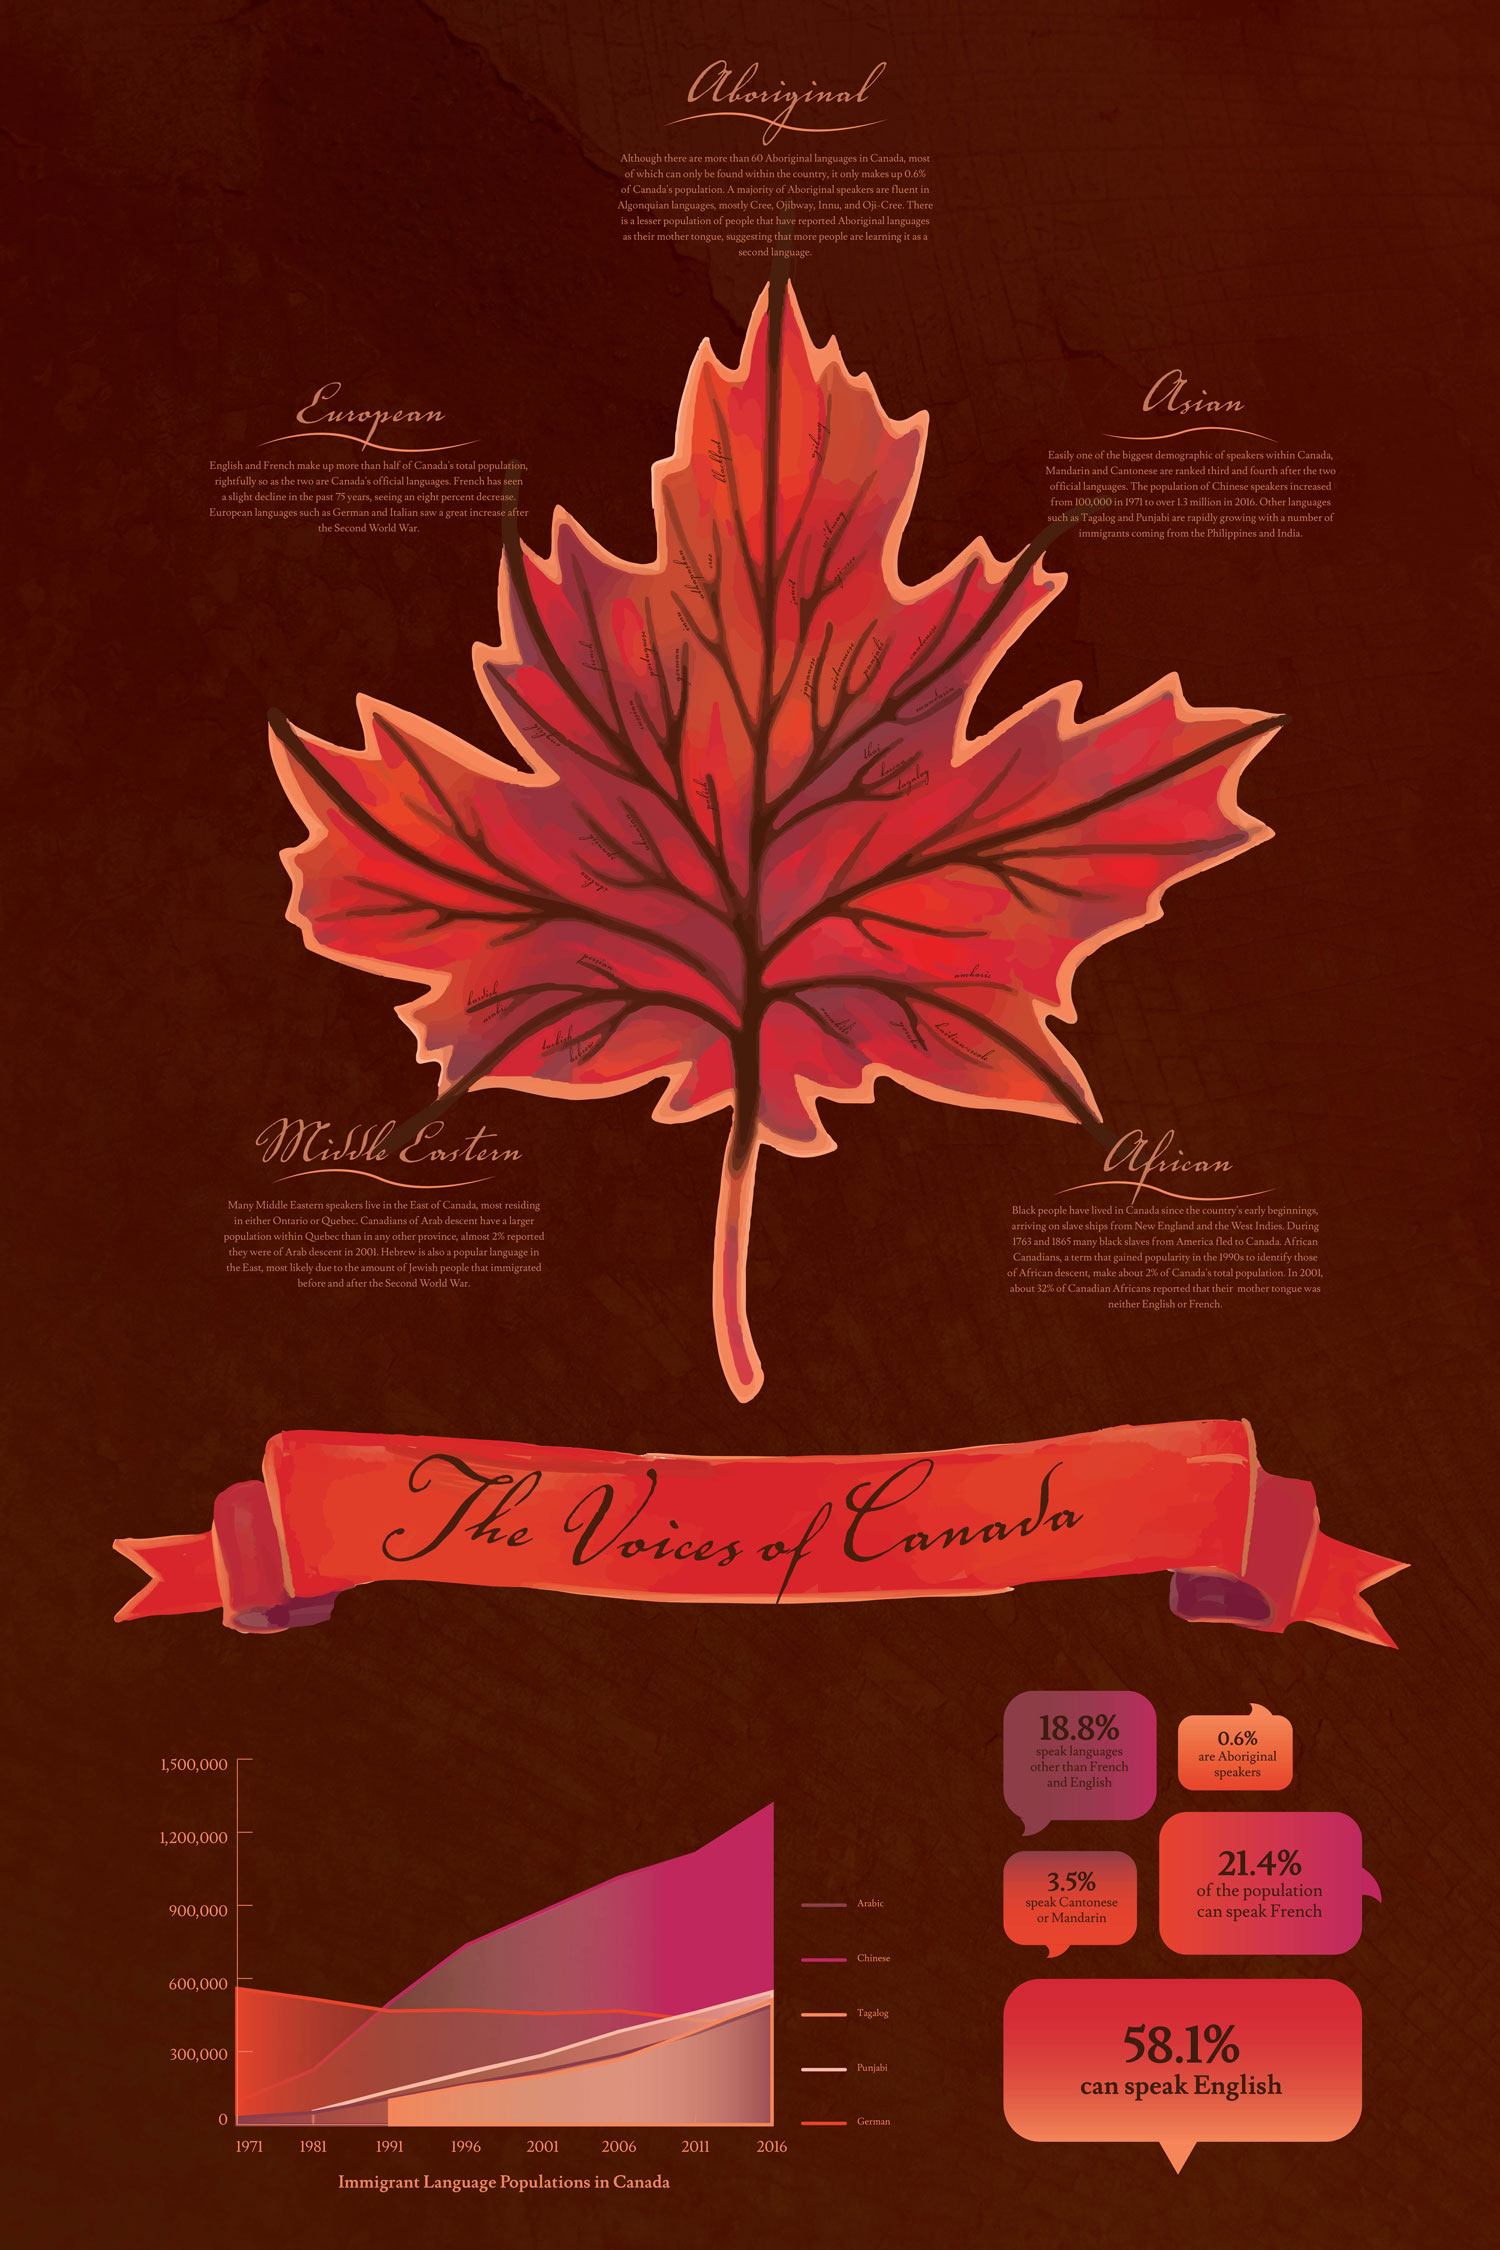 “The Voices of Canada” by Abby Jocson